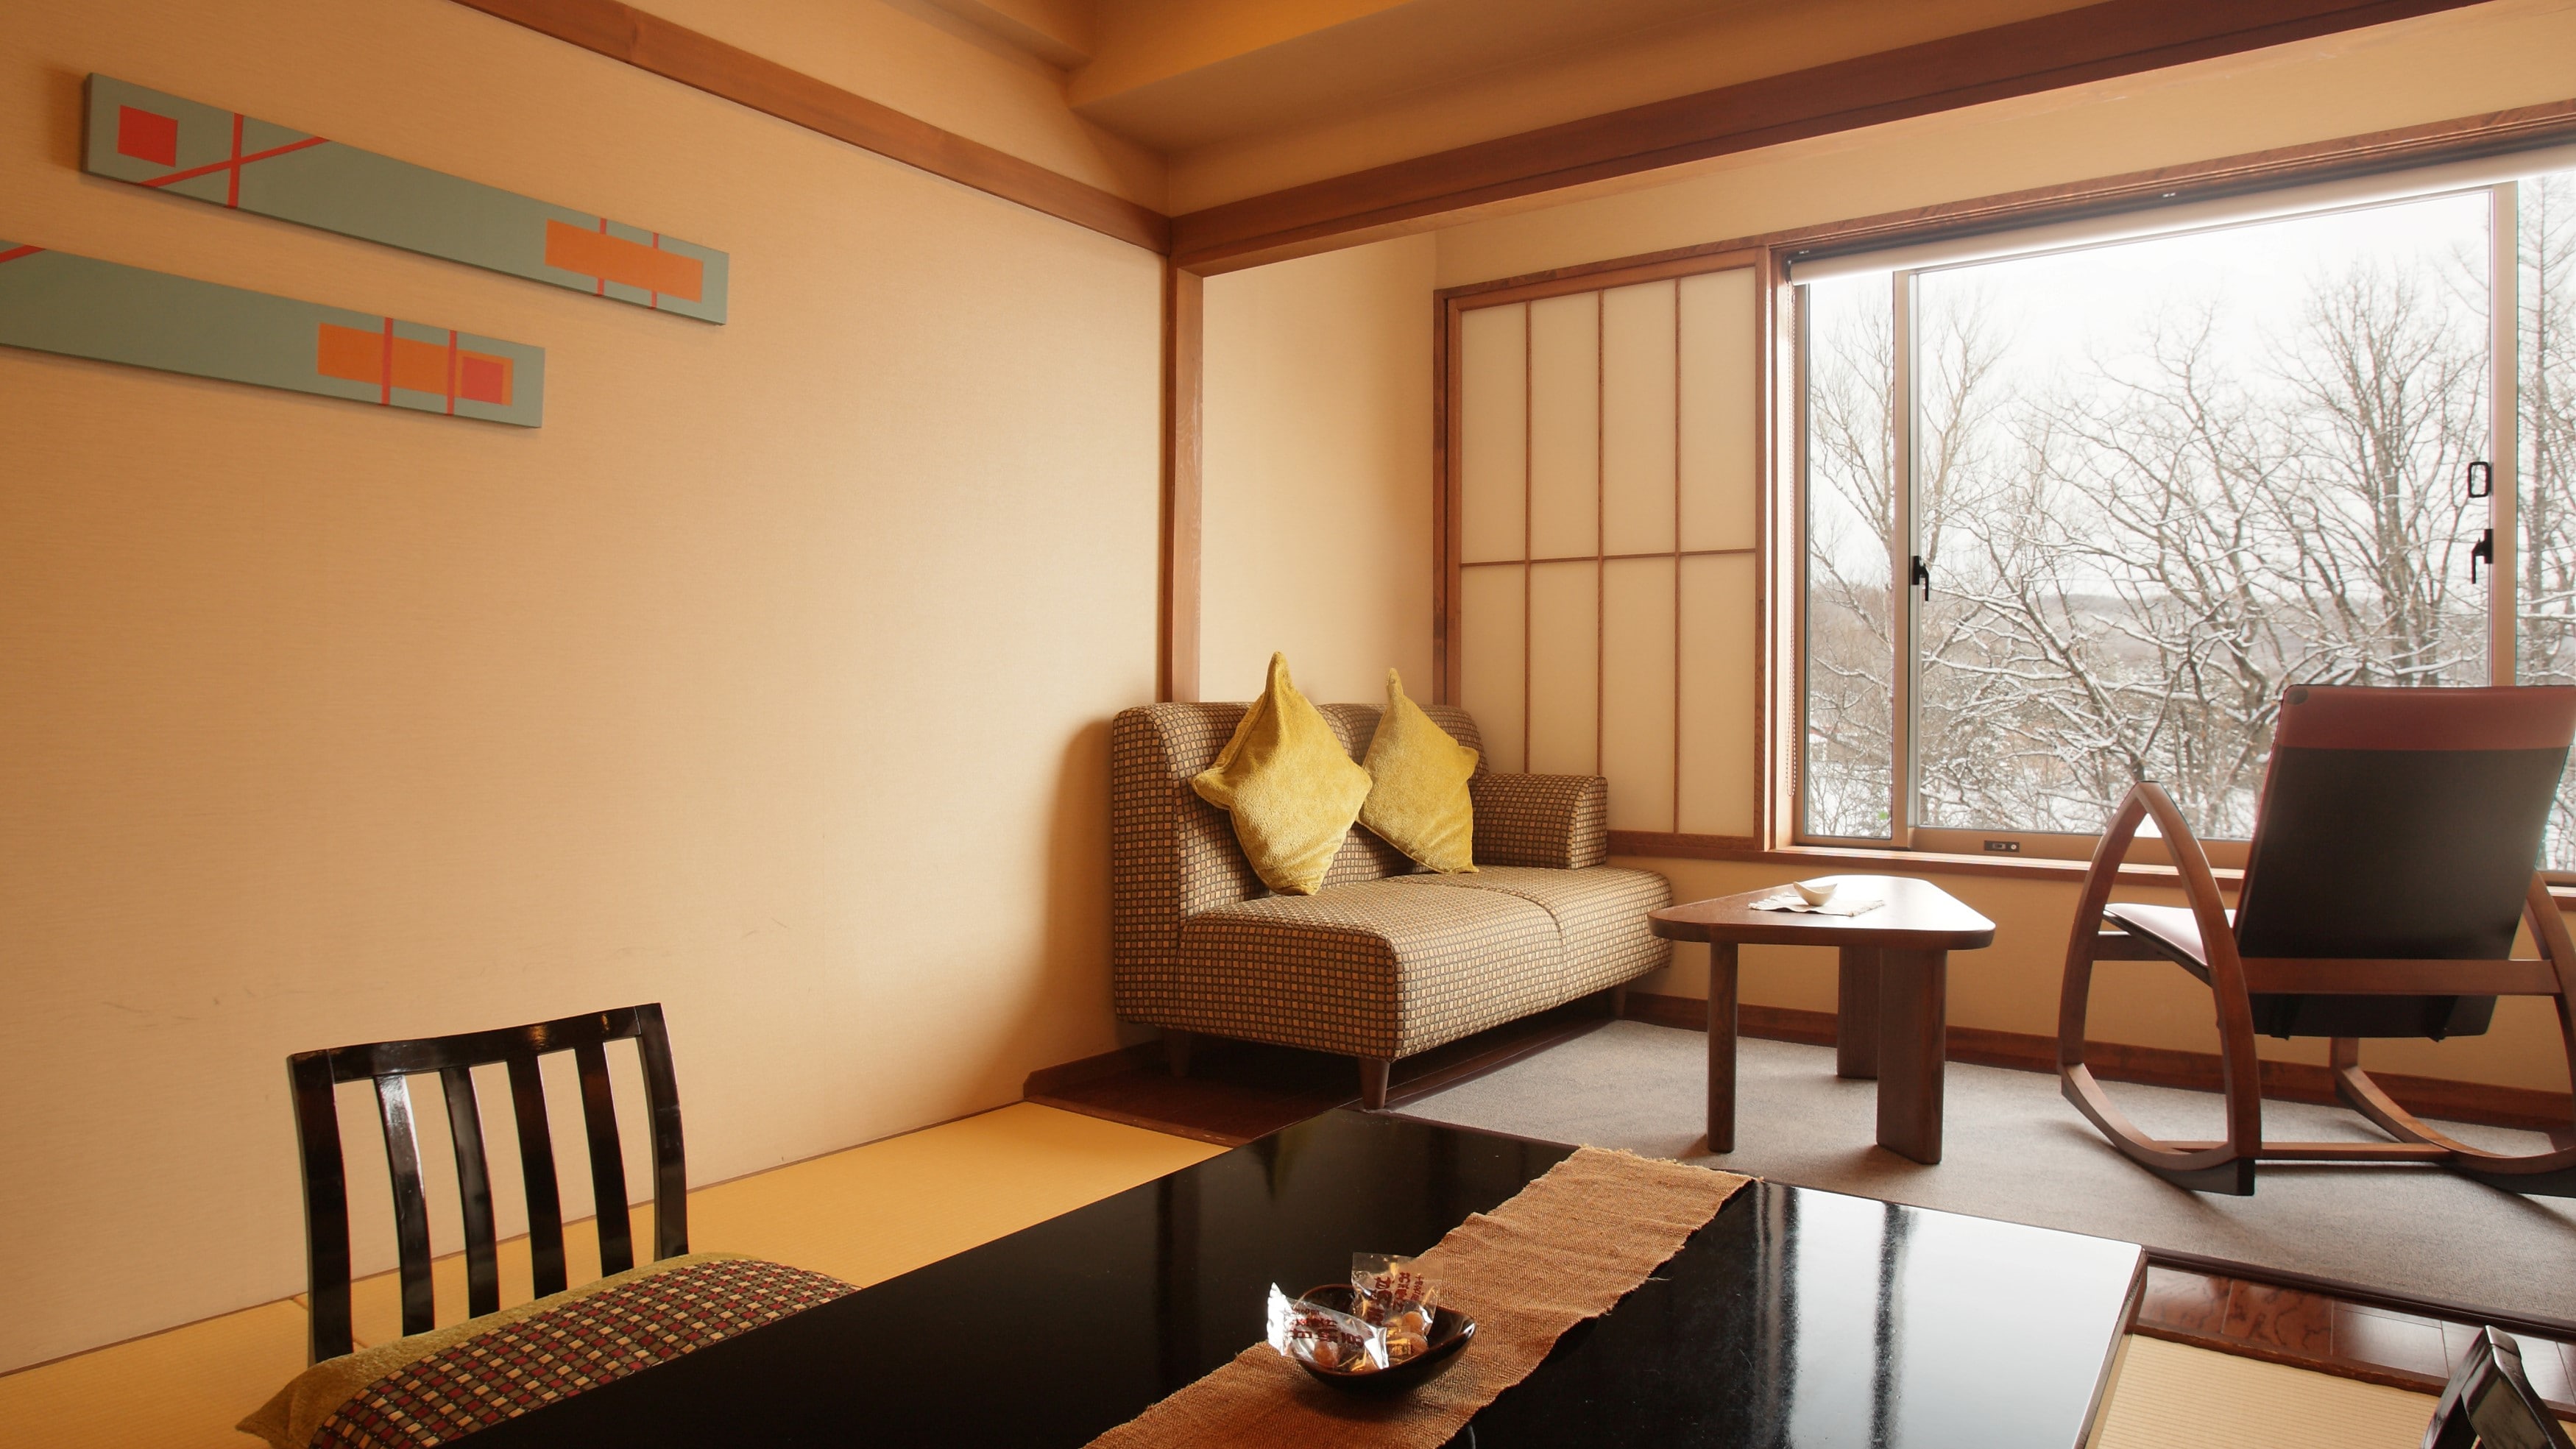 [Mameyotei] Japanese modern Japanese-style room, an example of a guest room